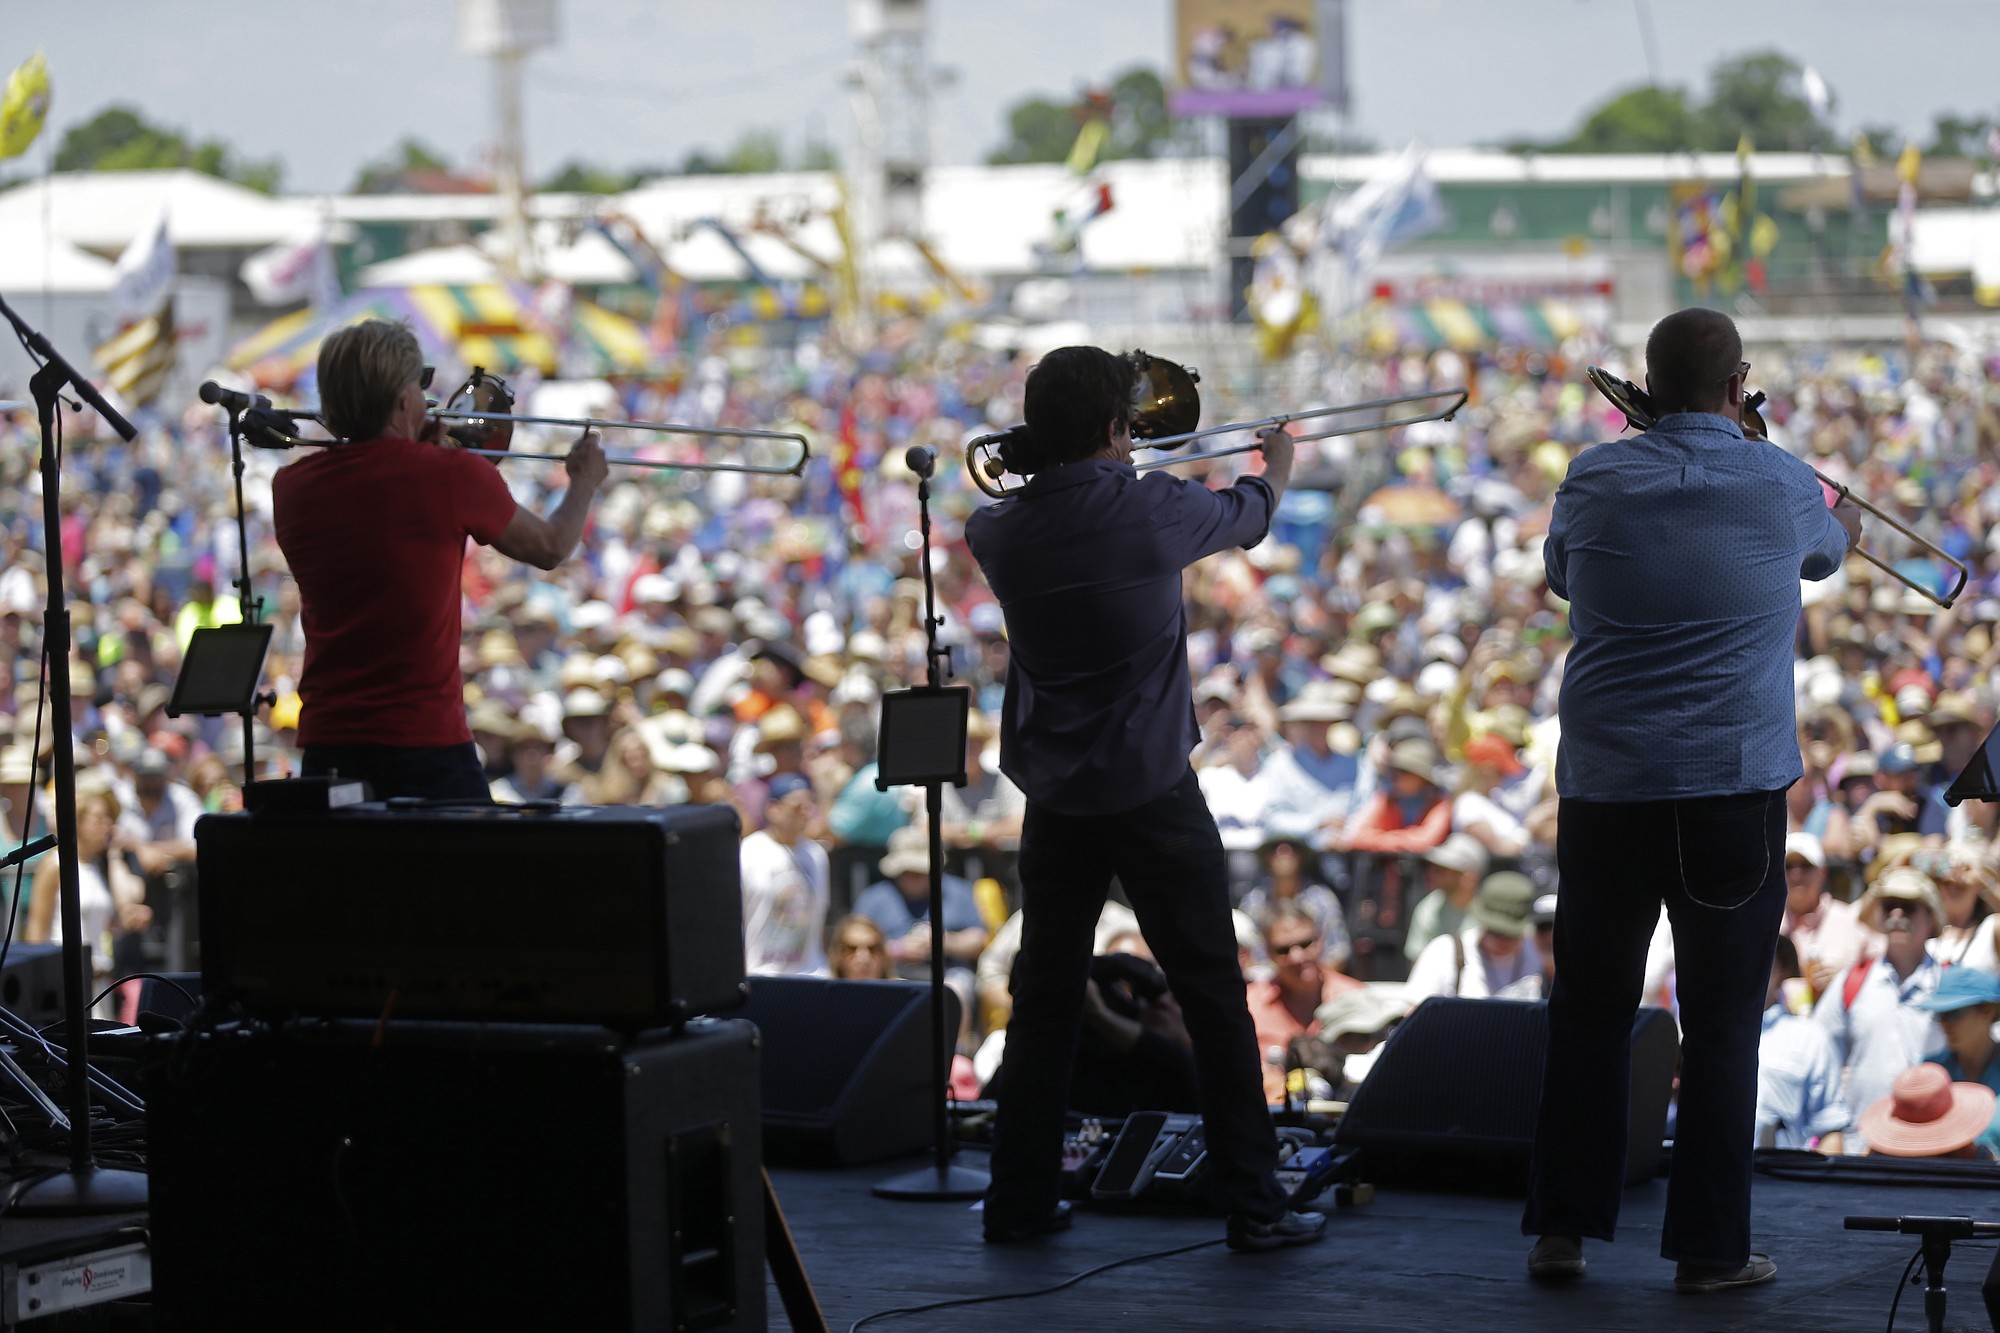 The band Bonerama performs Thursday at the New Orleans Jazz and Heritage Festival in New Orleans.